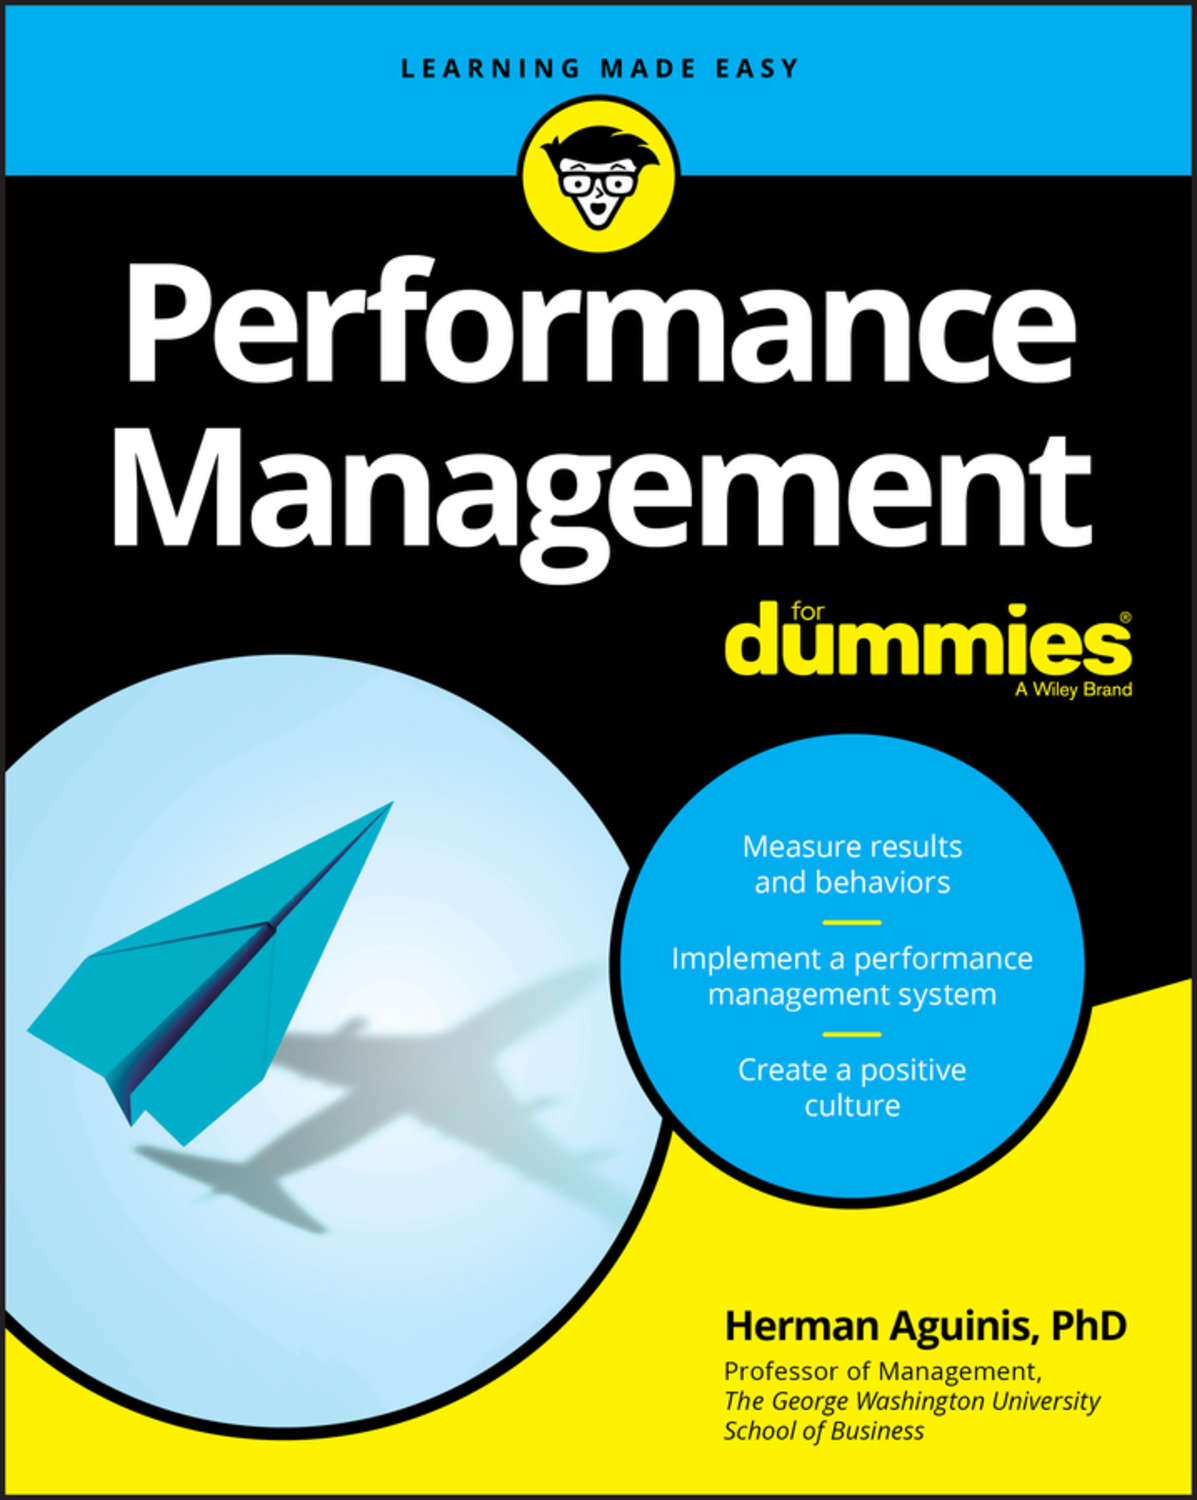 Book performance. Management for Dummies. Aguinis, h. Performance Management (4th ed., 2018)..